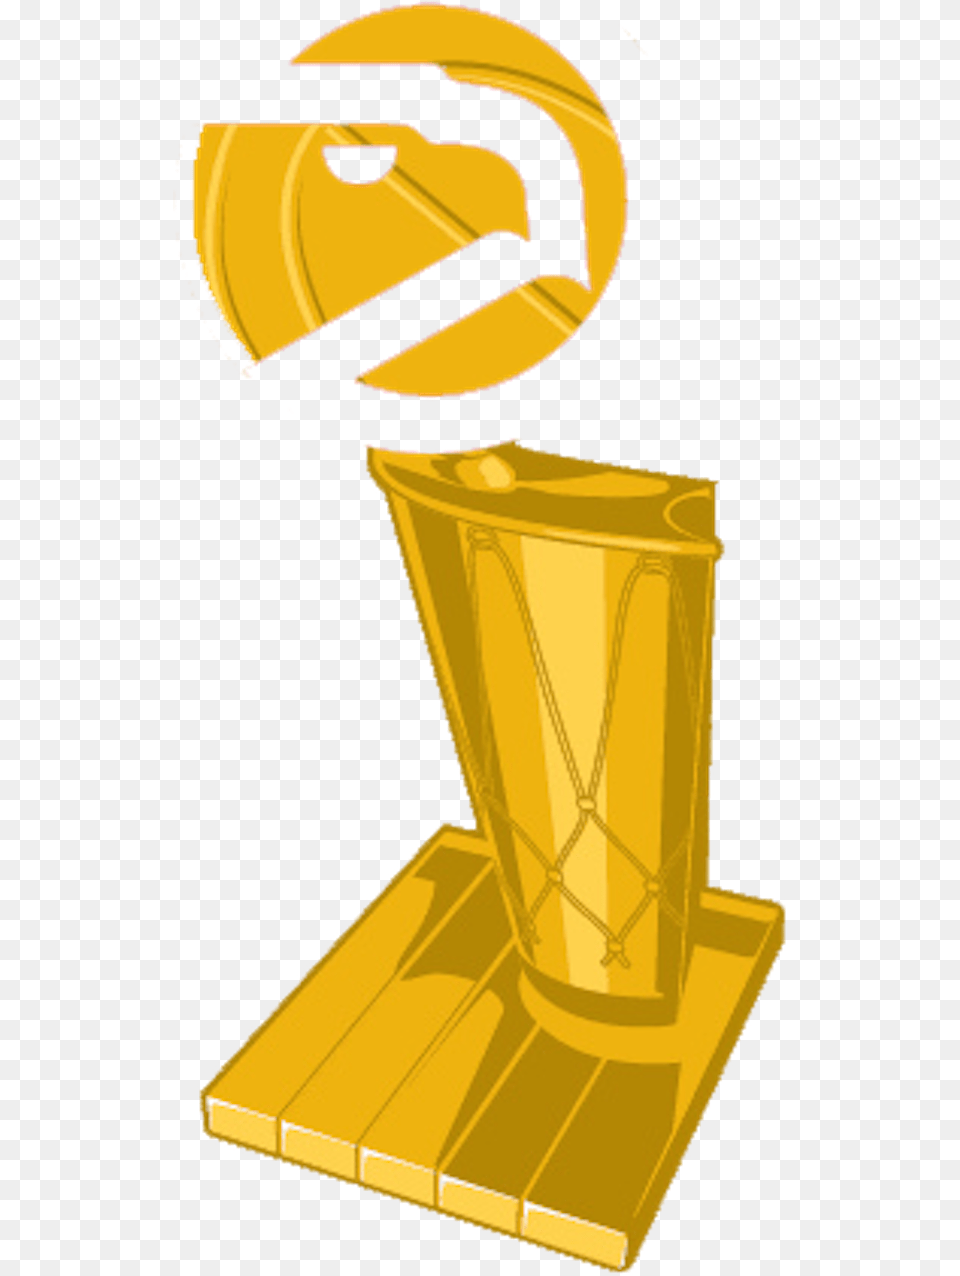 Library Of Calvalier Basketball Champ Trophy Svg Royalty Trophy Nba Free Transparent Png